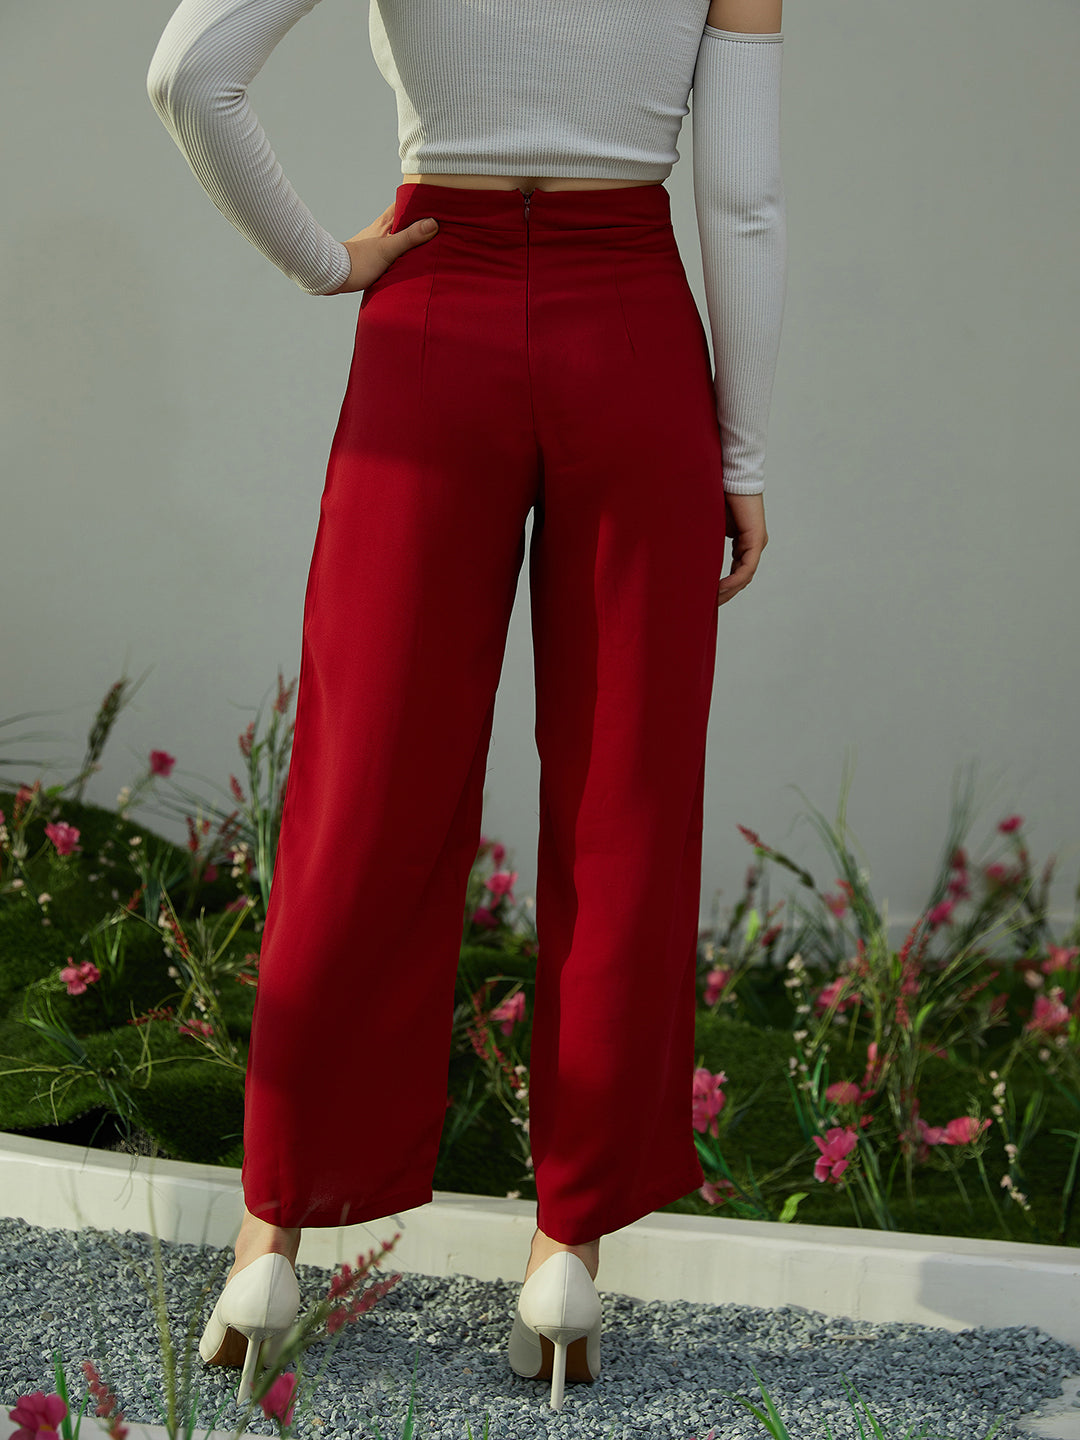 SELONE Palazzo Pants for Women Petite Formal Wide Leg Trendy Casual Summer  Long Pant Fashion Spring/ Versatile Pants for Everyday Wear Running Errands  Going to Work Attending a Casual Event Red S -